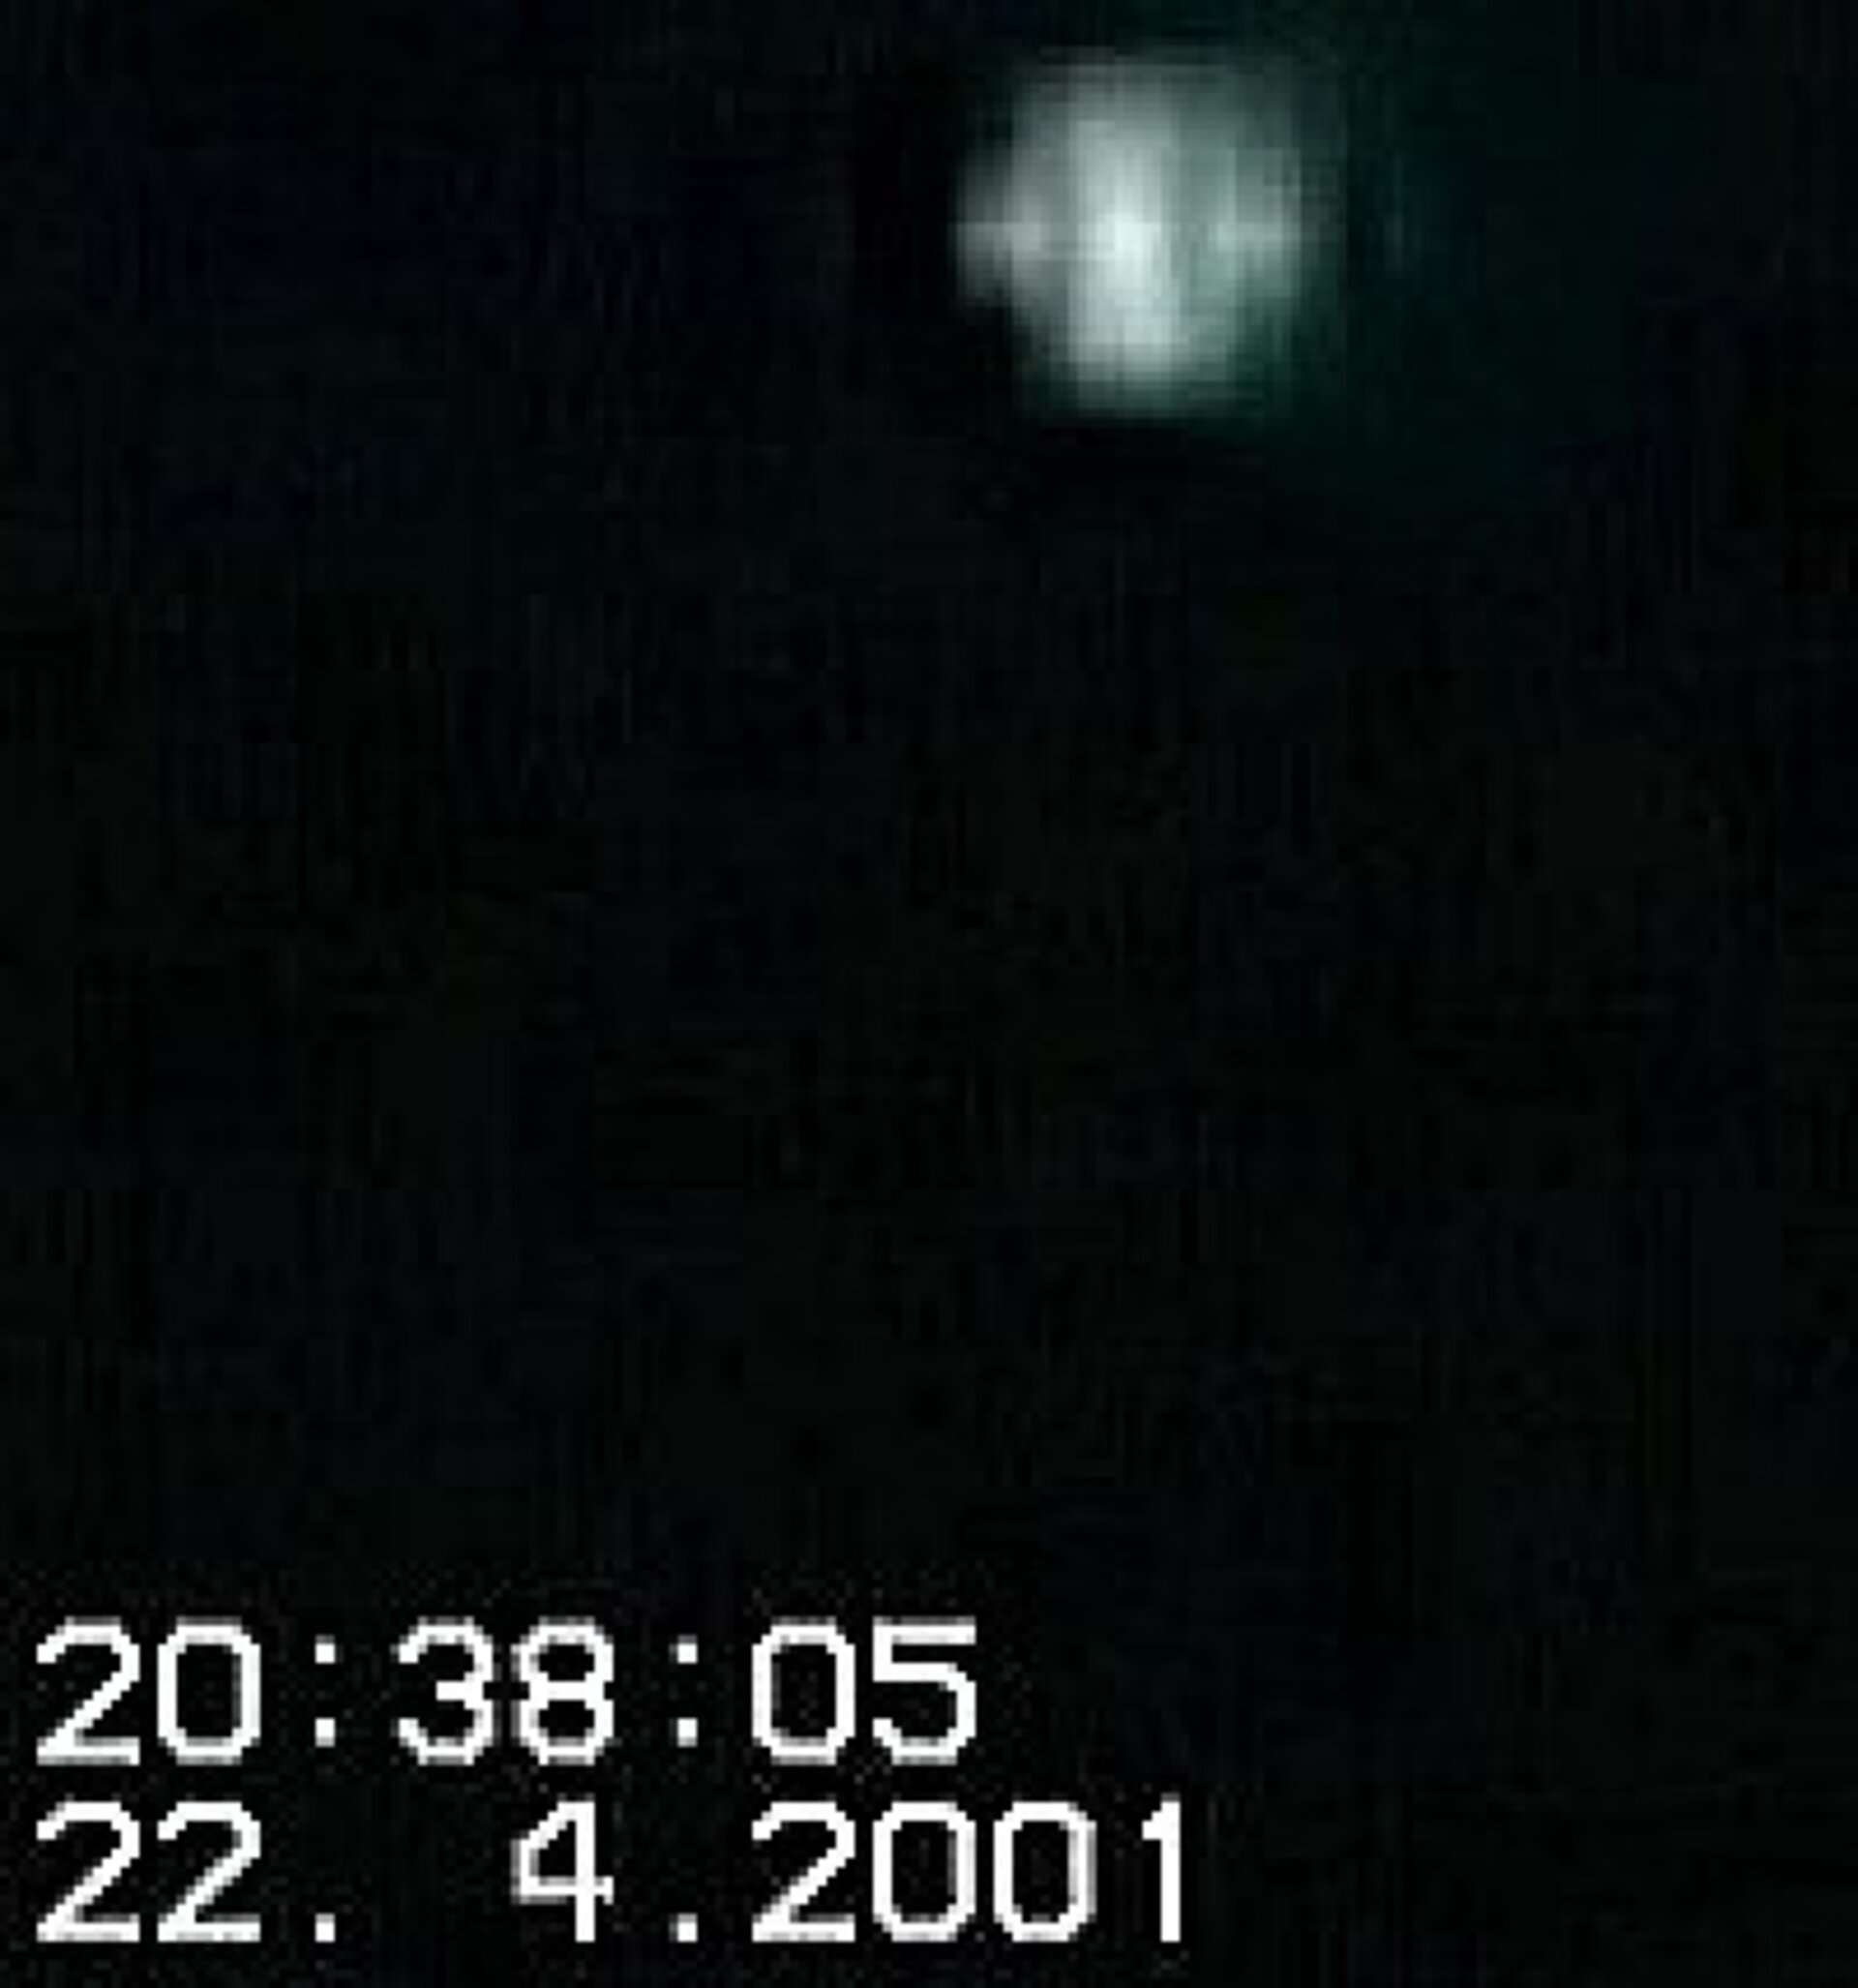 Video camera images of ISS